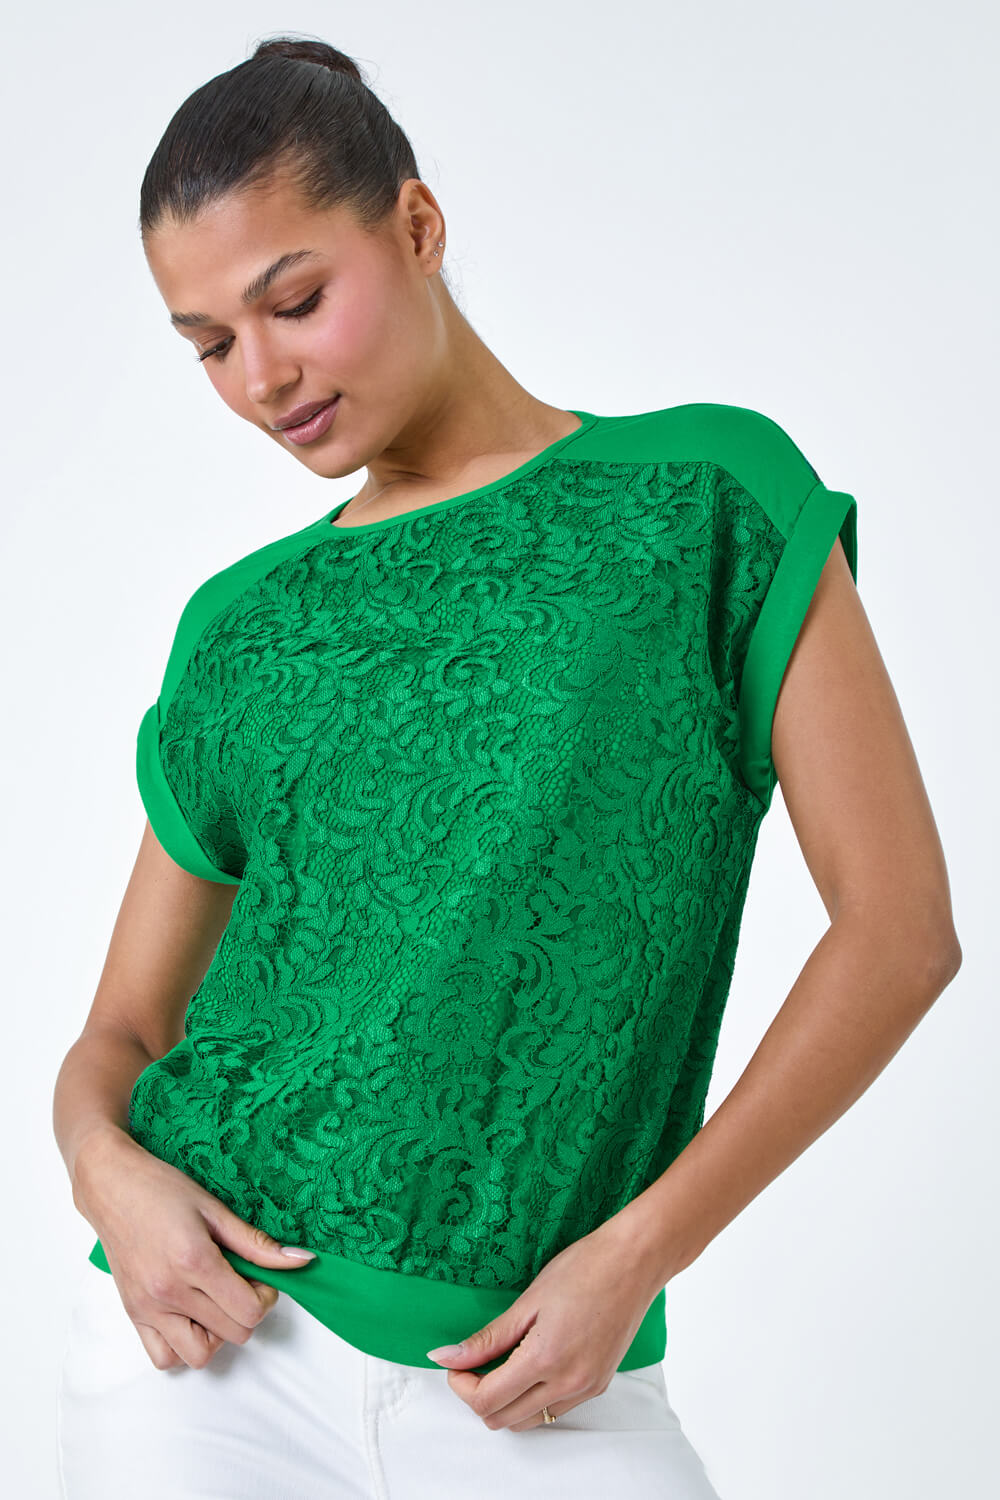 Green Lace Panel Stretch Jersey Top, Image 2 of 5